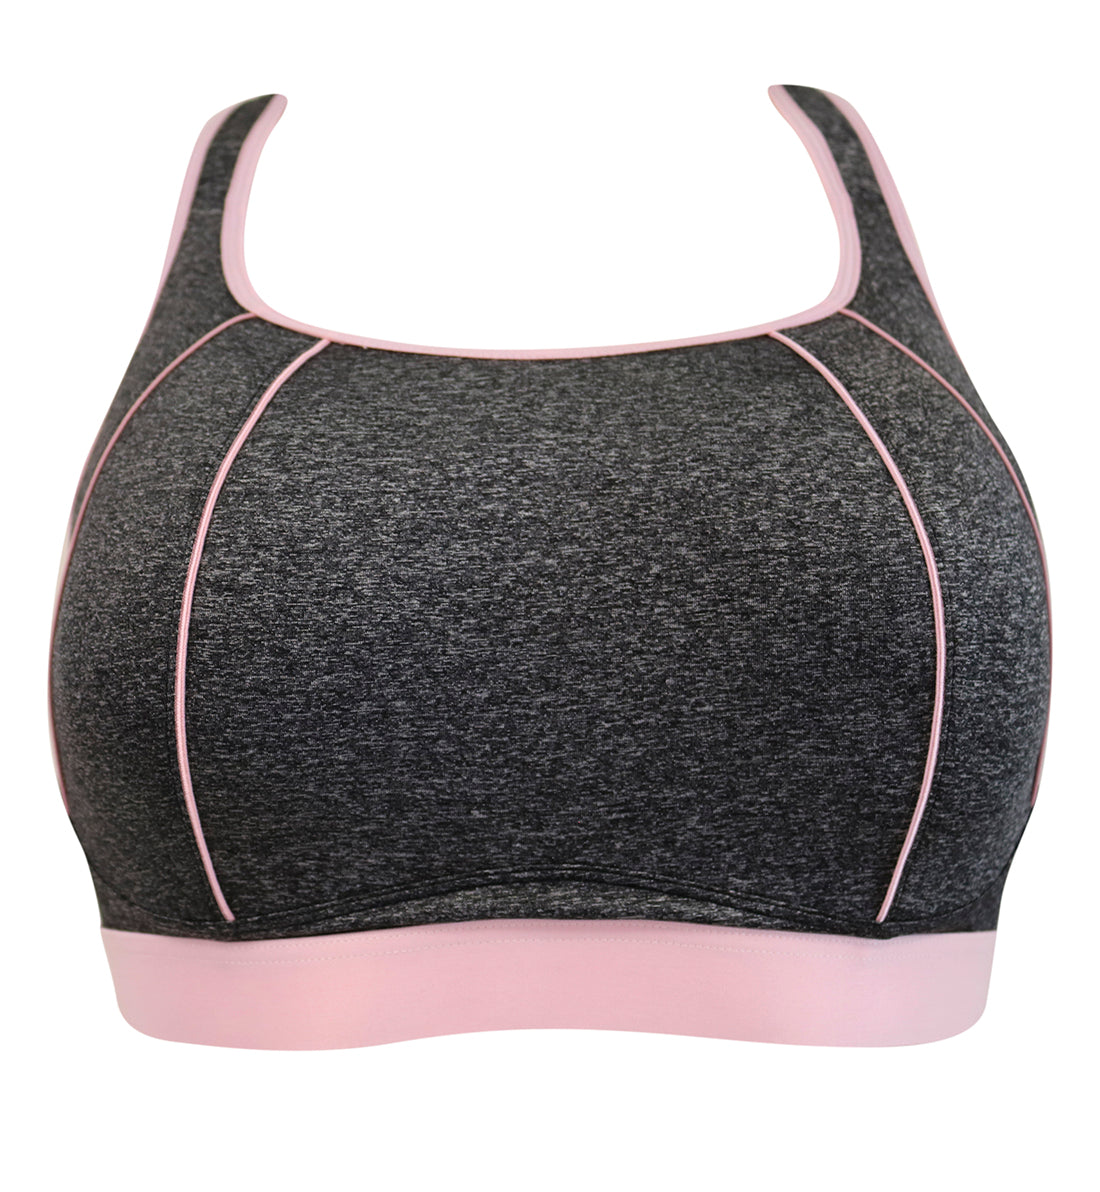 Pour Moi Energy Underwire Light Padded Cross Back Sports Bra (97005)-  Black/Coral